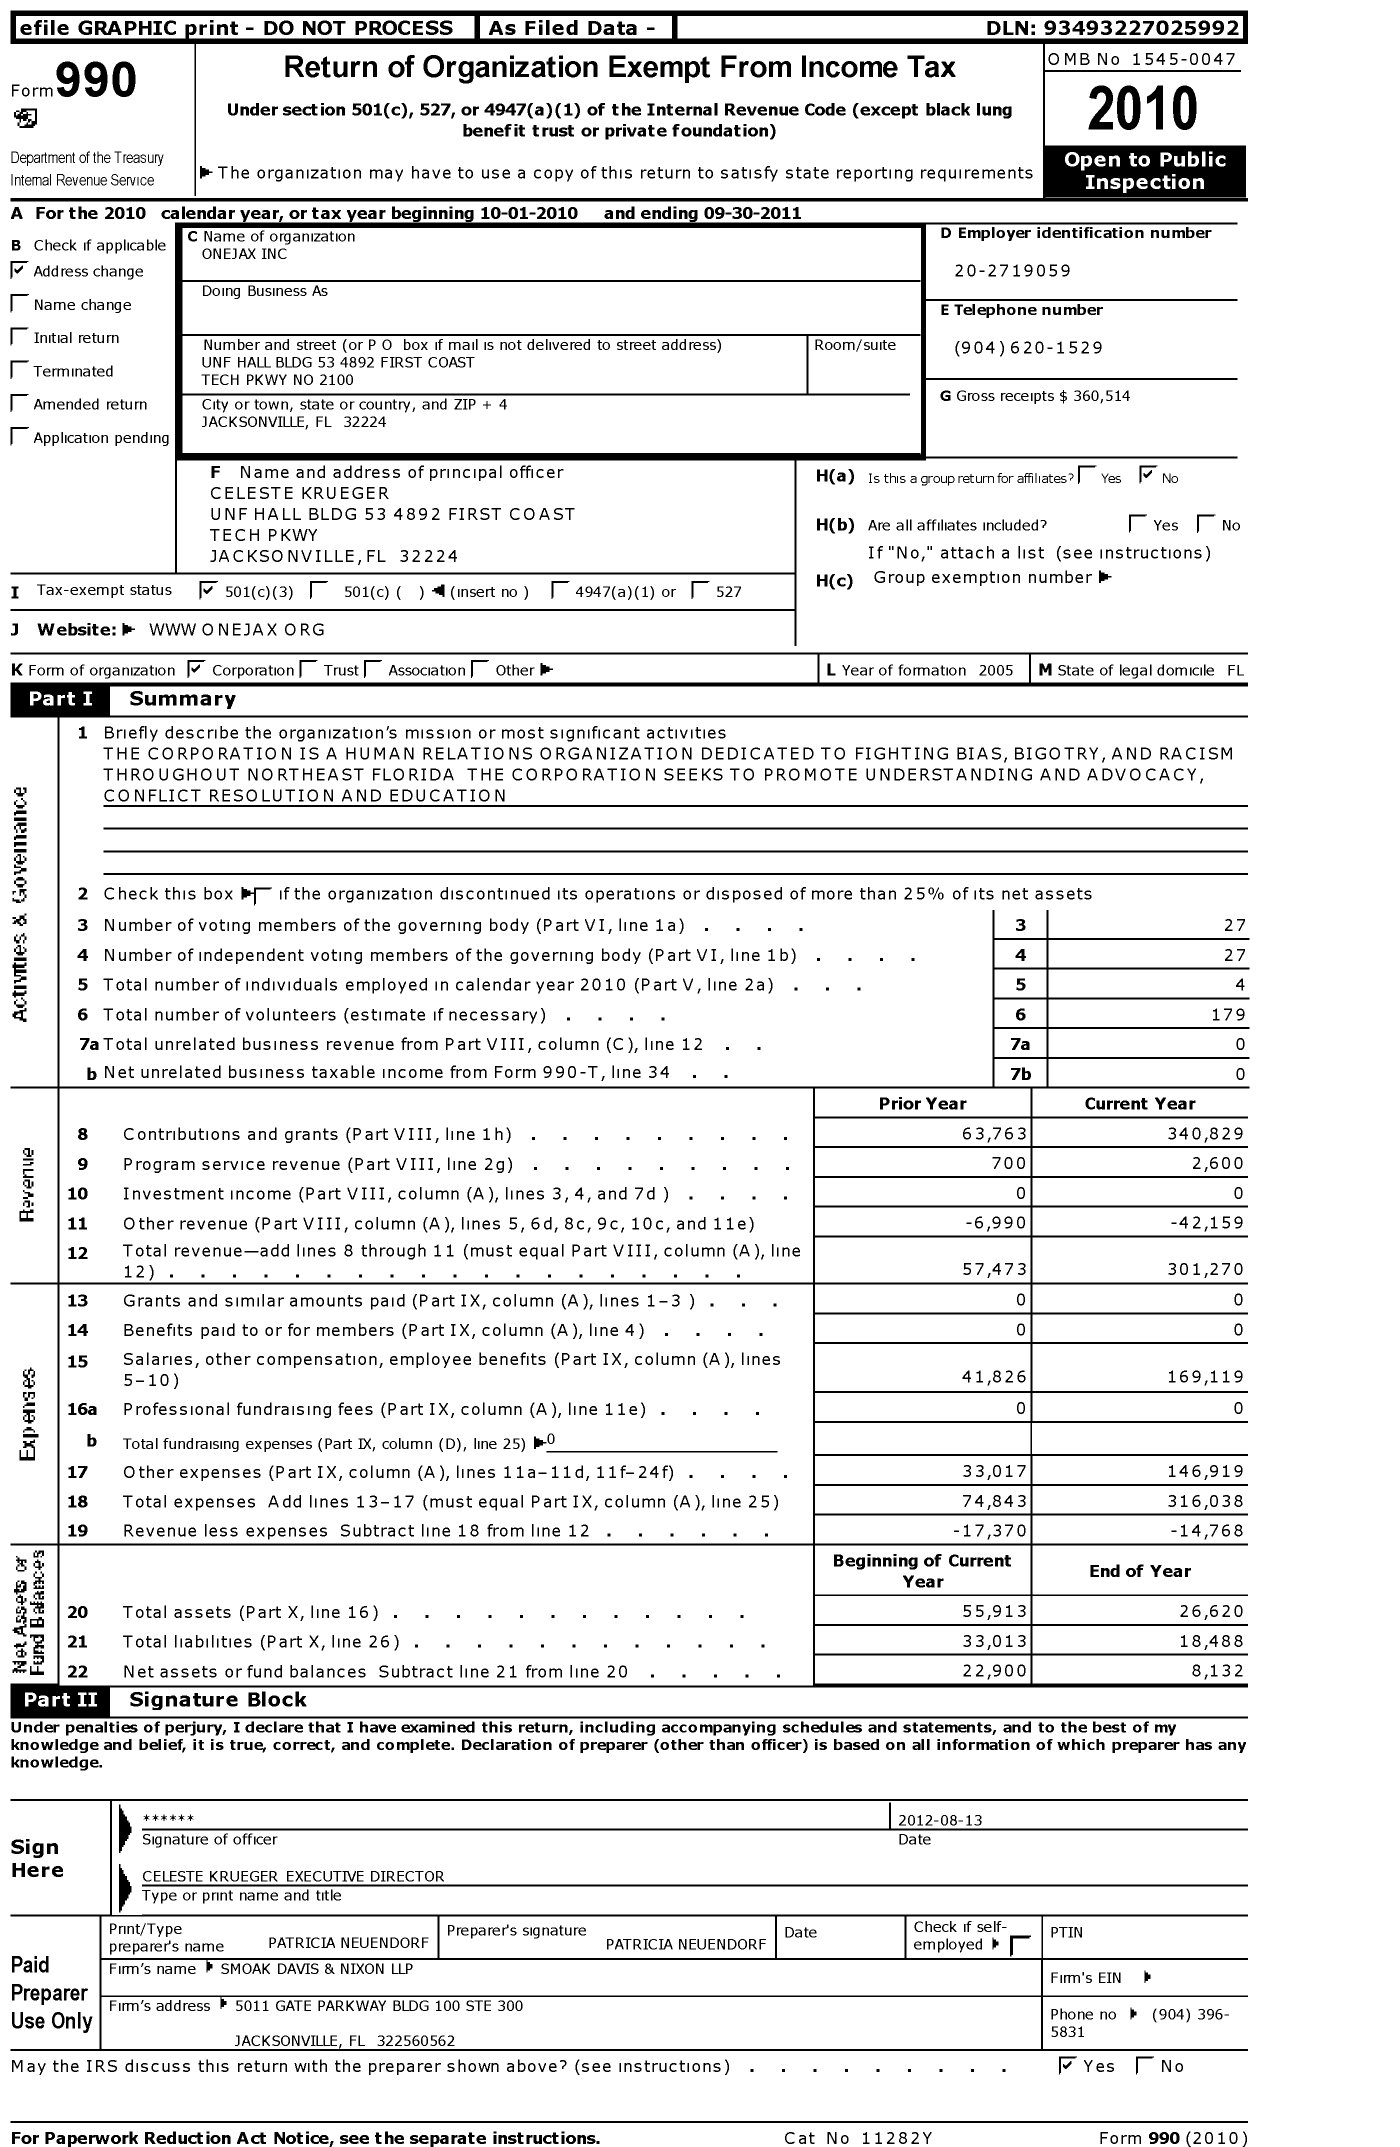 Image of first page of 2010 Form 990 for Onejax